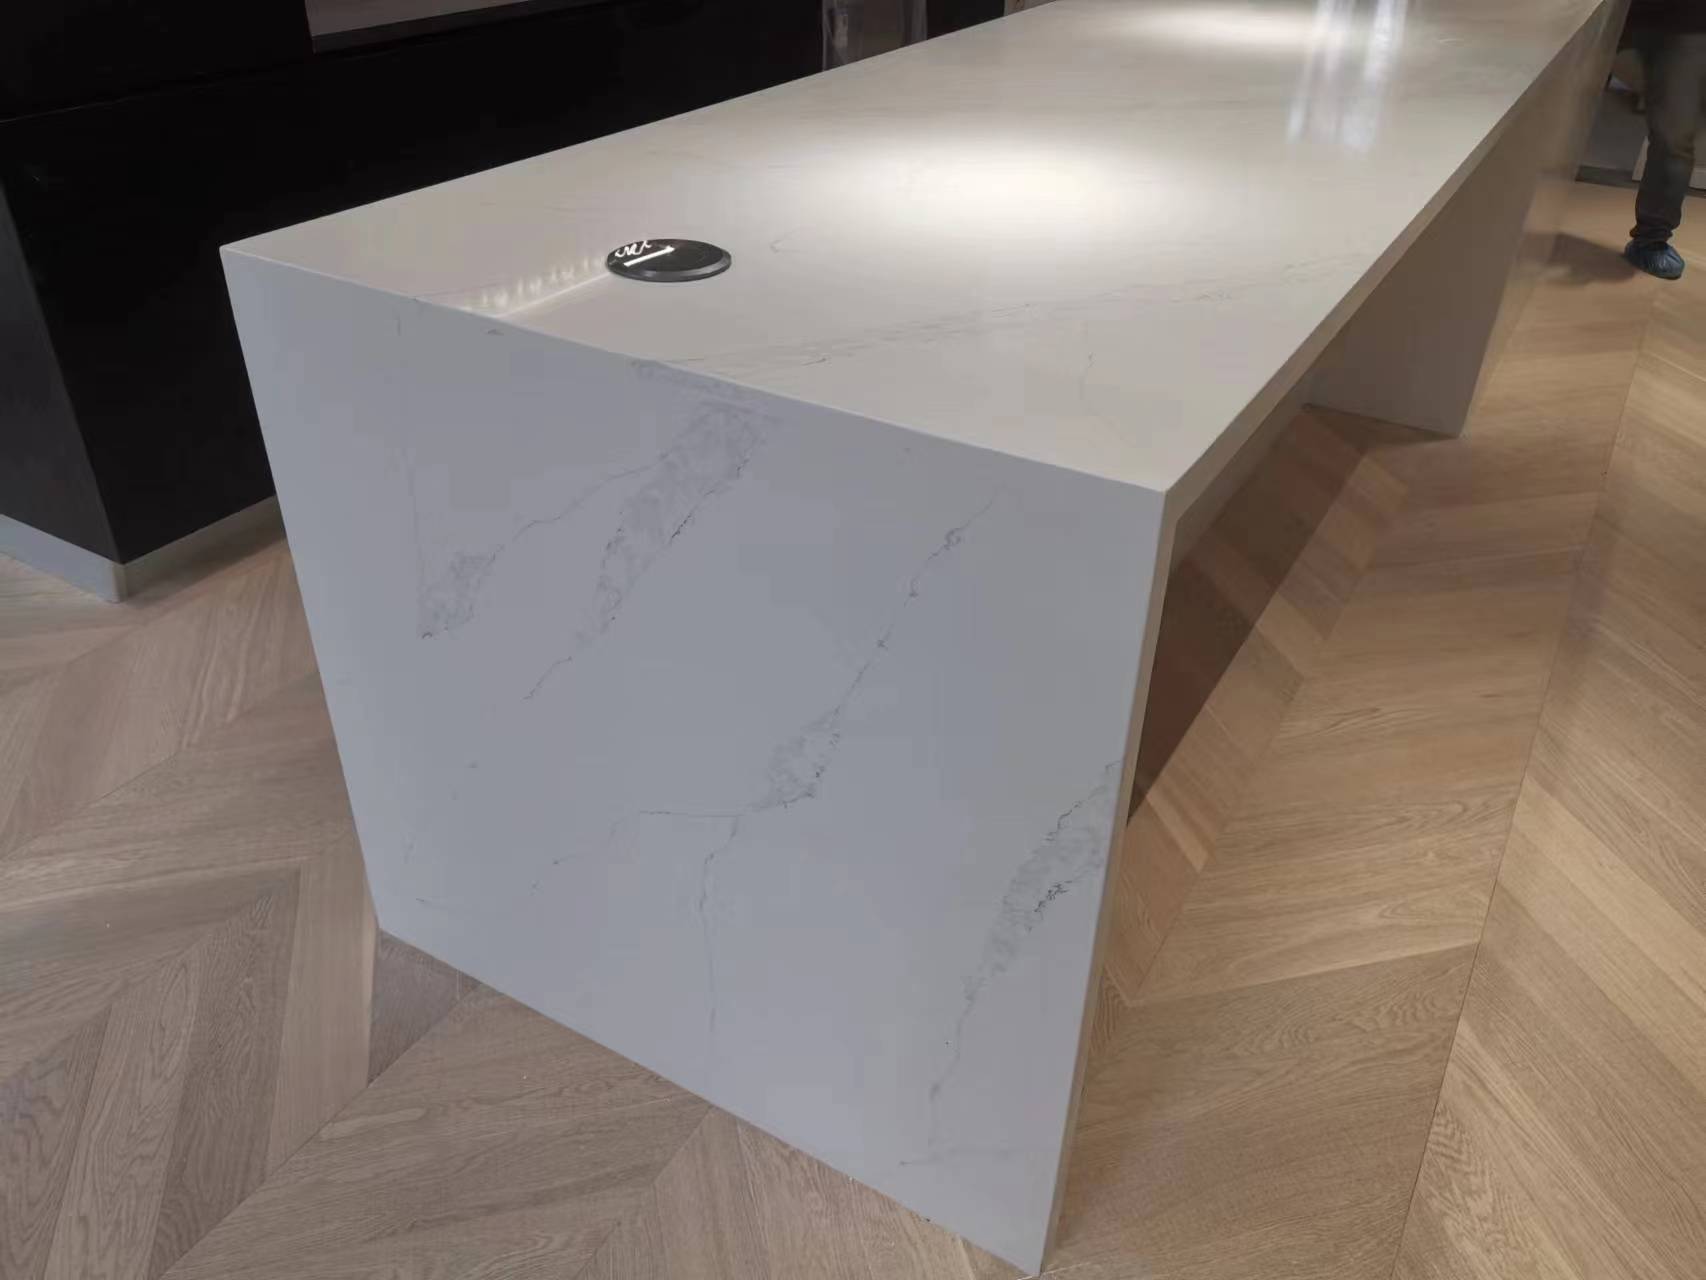 Wayon quartz stone vanity top Professional 45-degree splicing process + hand-polished details, the finished product looks more perfect, and every detail can stand the test.